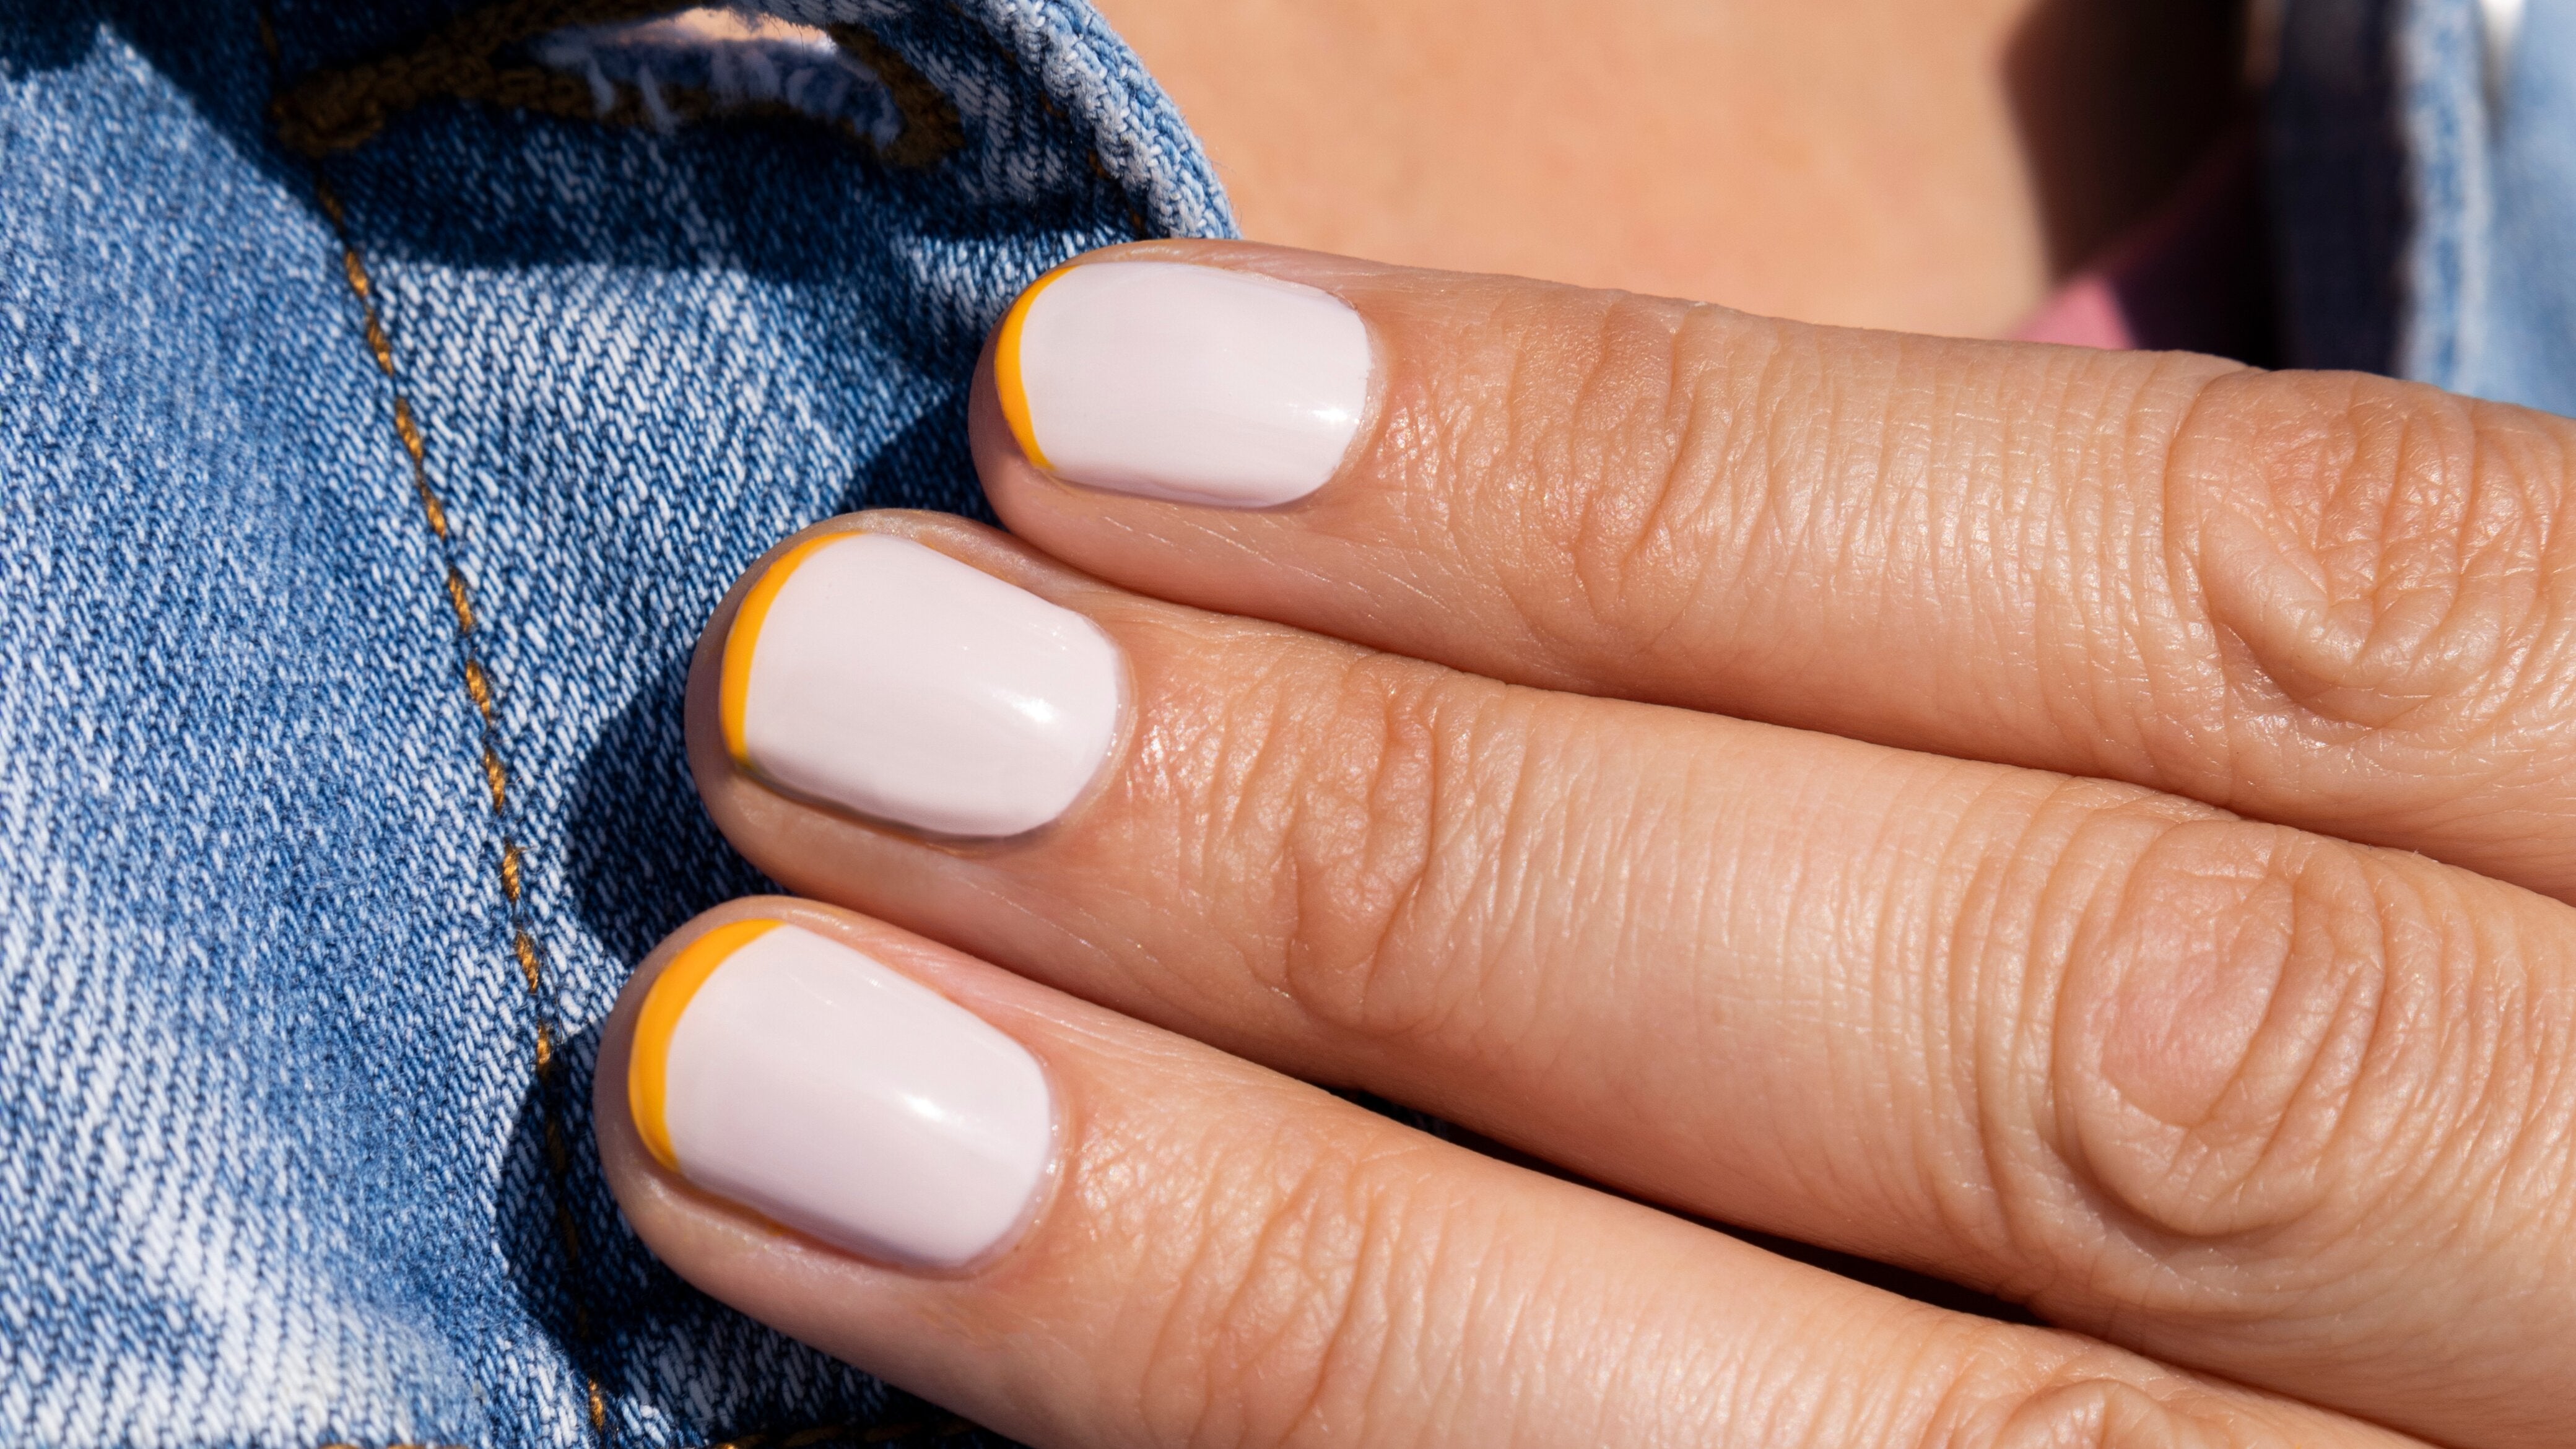 Rainbow Tie-Dye French Tips Are the Perfect Manicure for Pride Month |  Allure